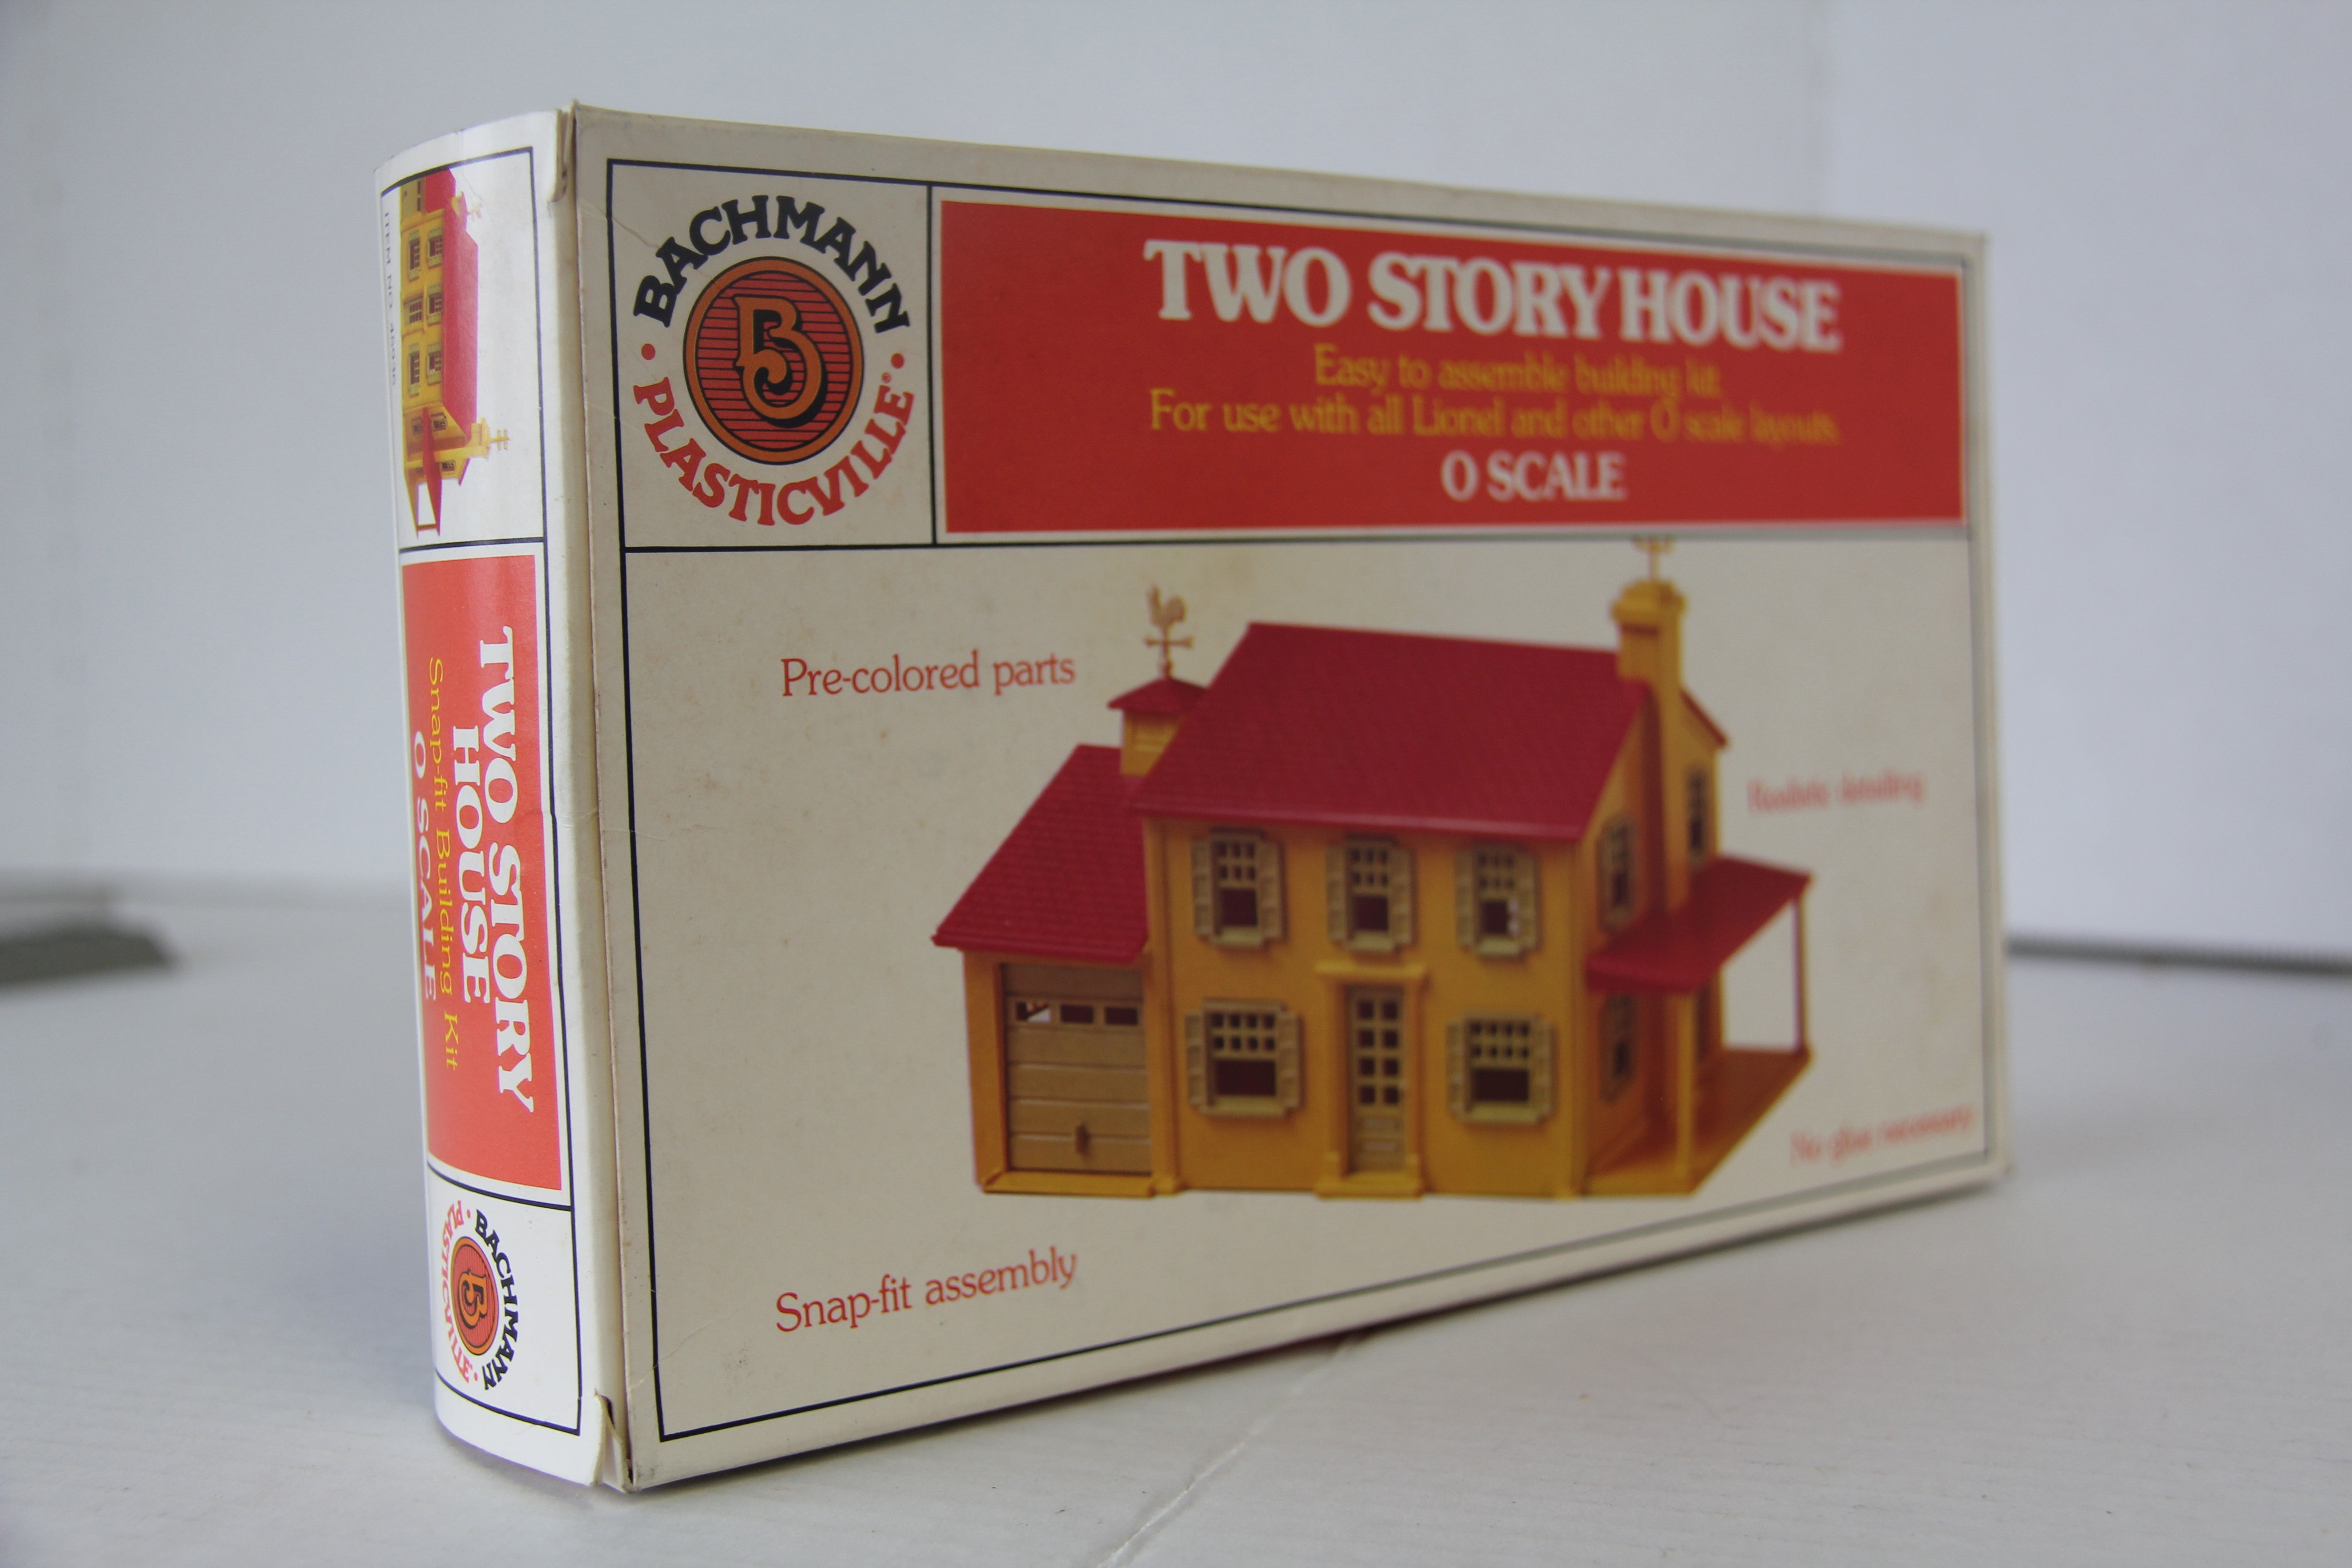 Bachmann Plasticville #45936 Two Story House-Second hand-M4012